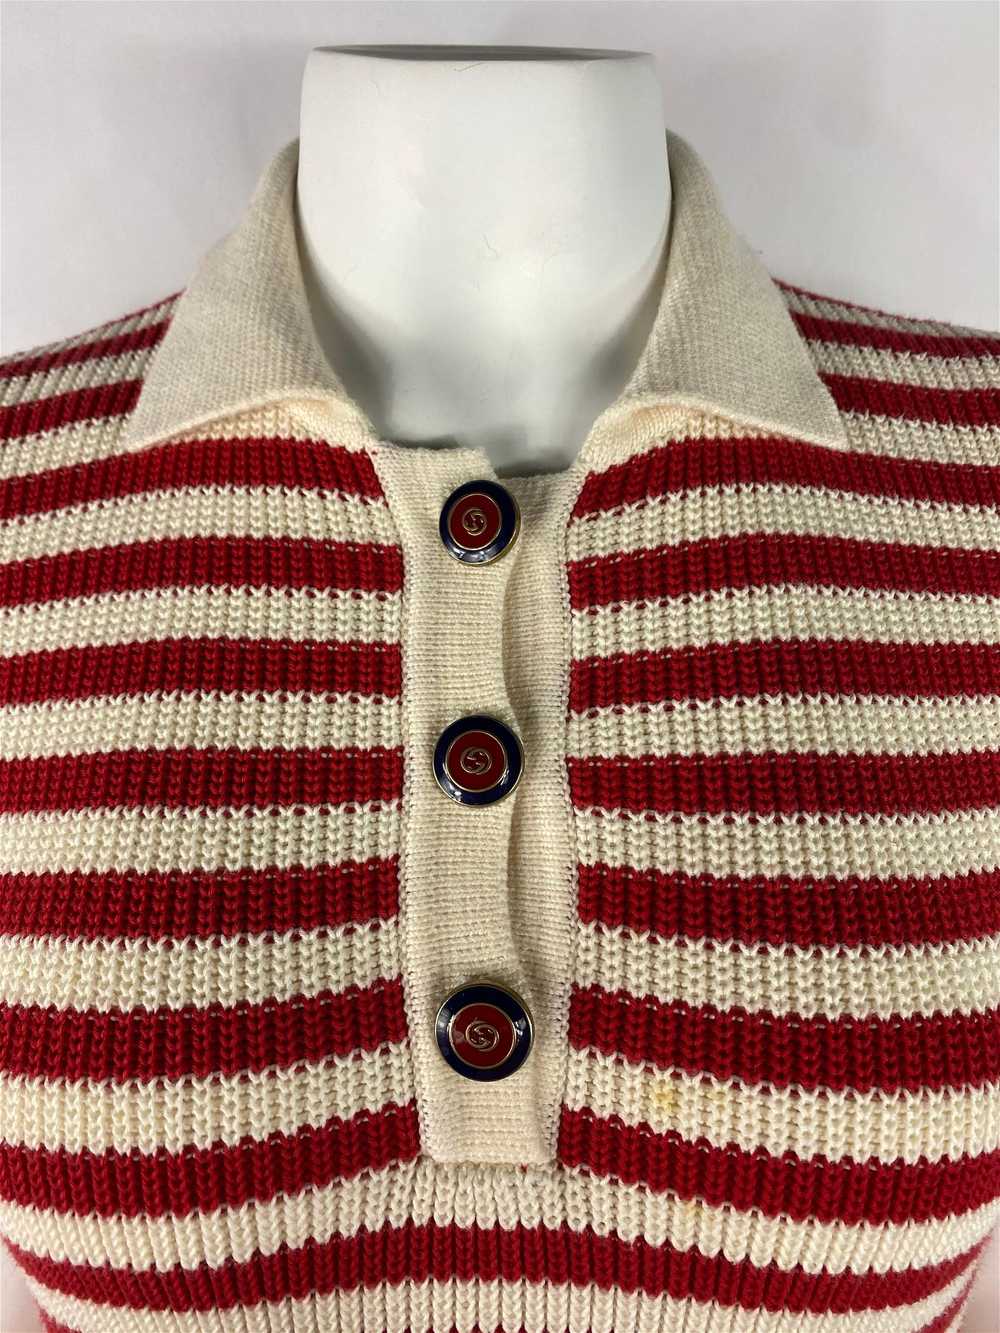 Gucci Red and White Wool Knit Sweater Top - image 8